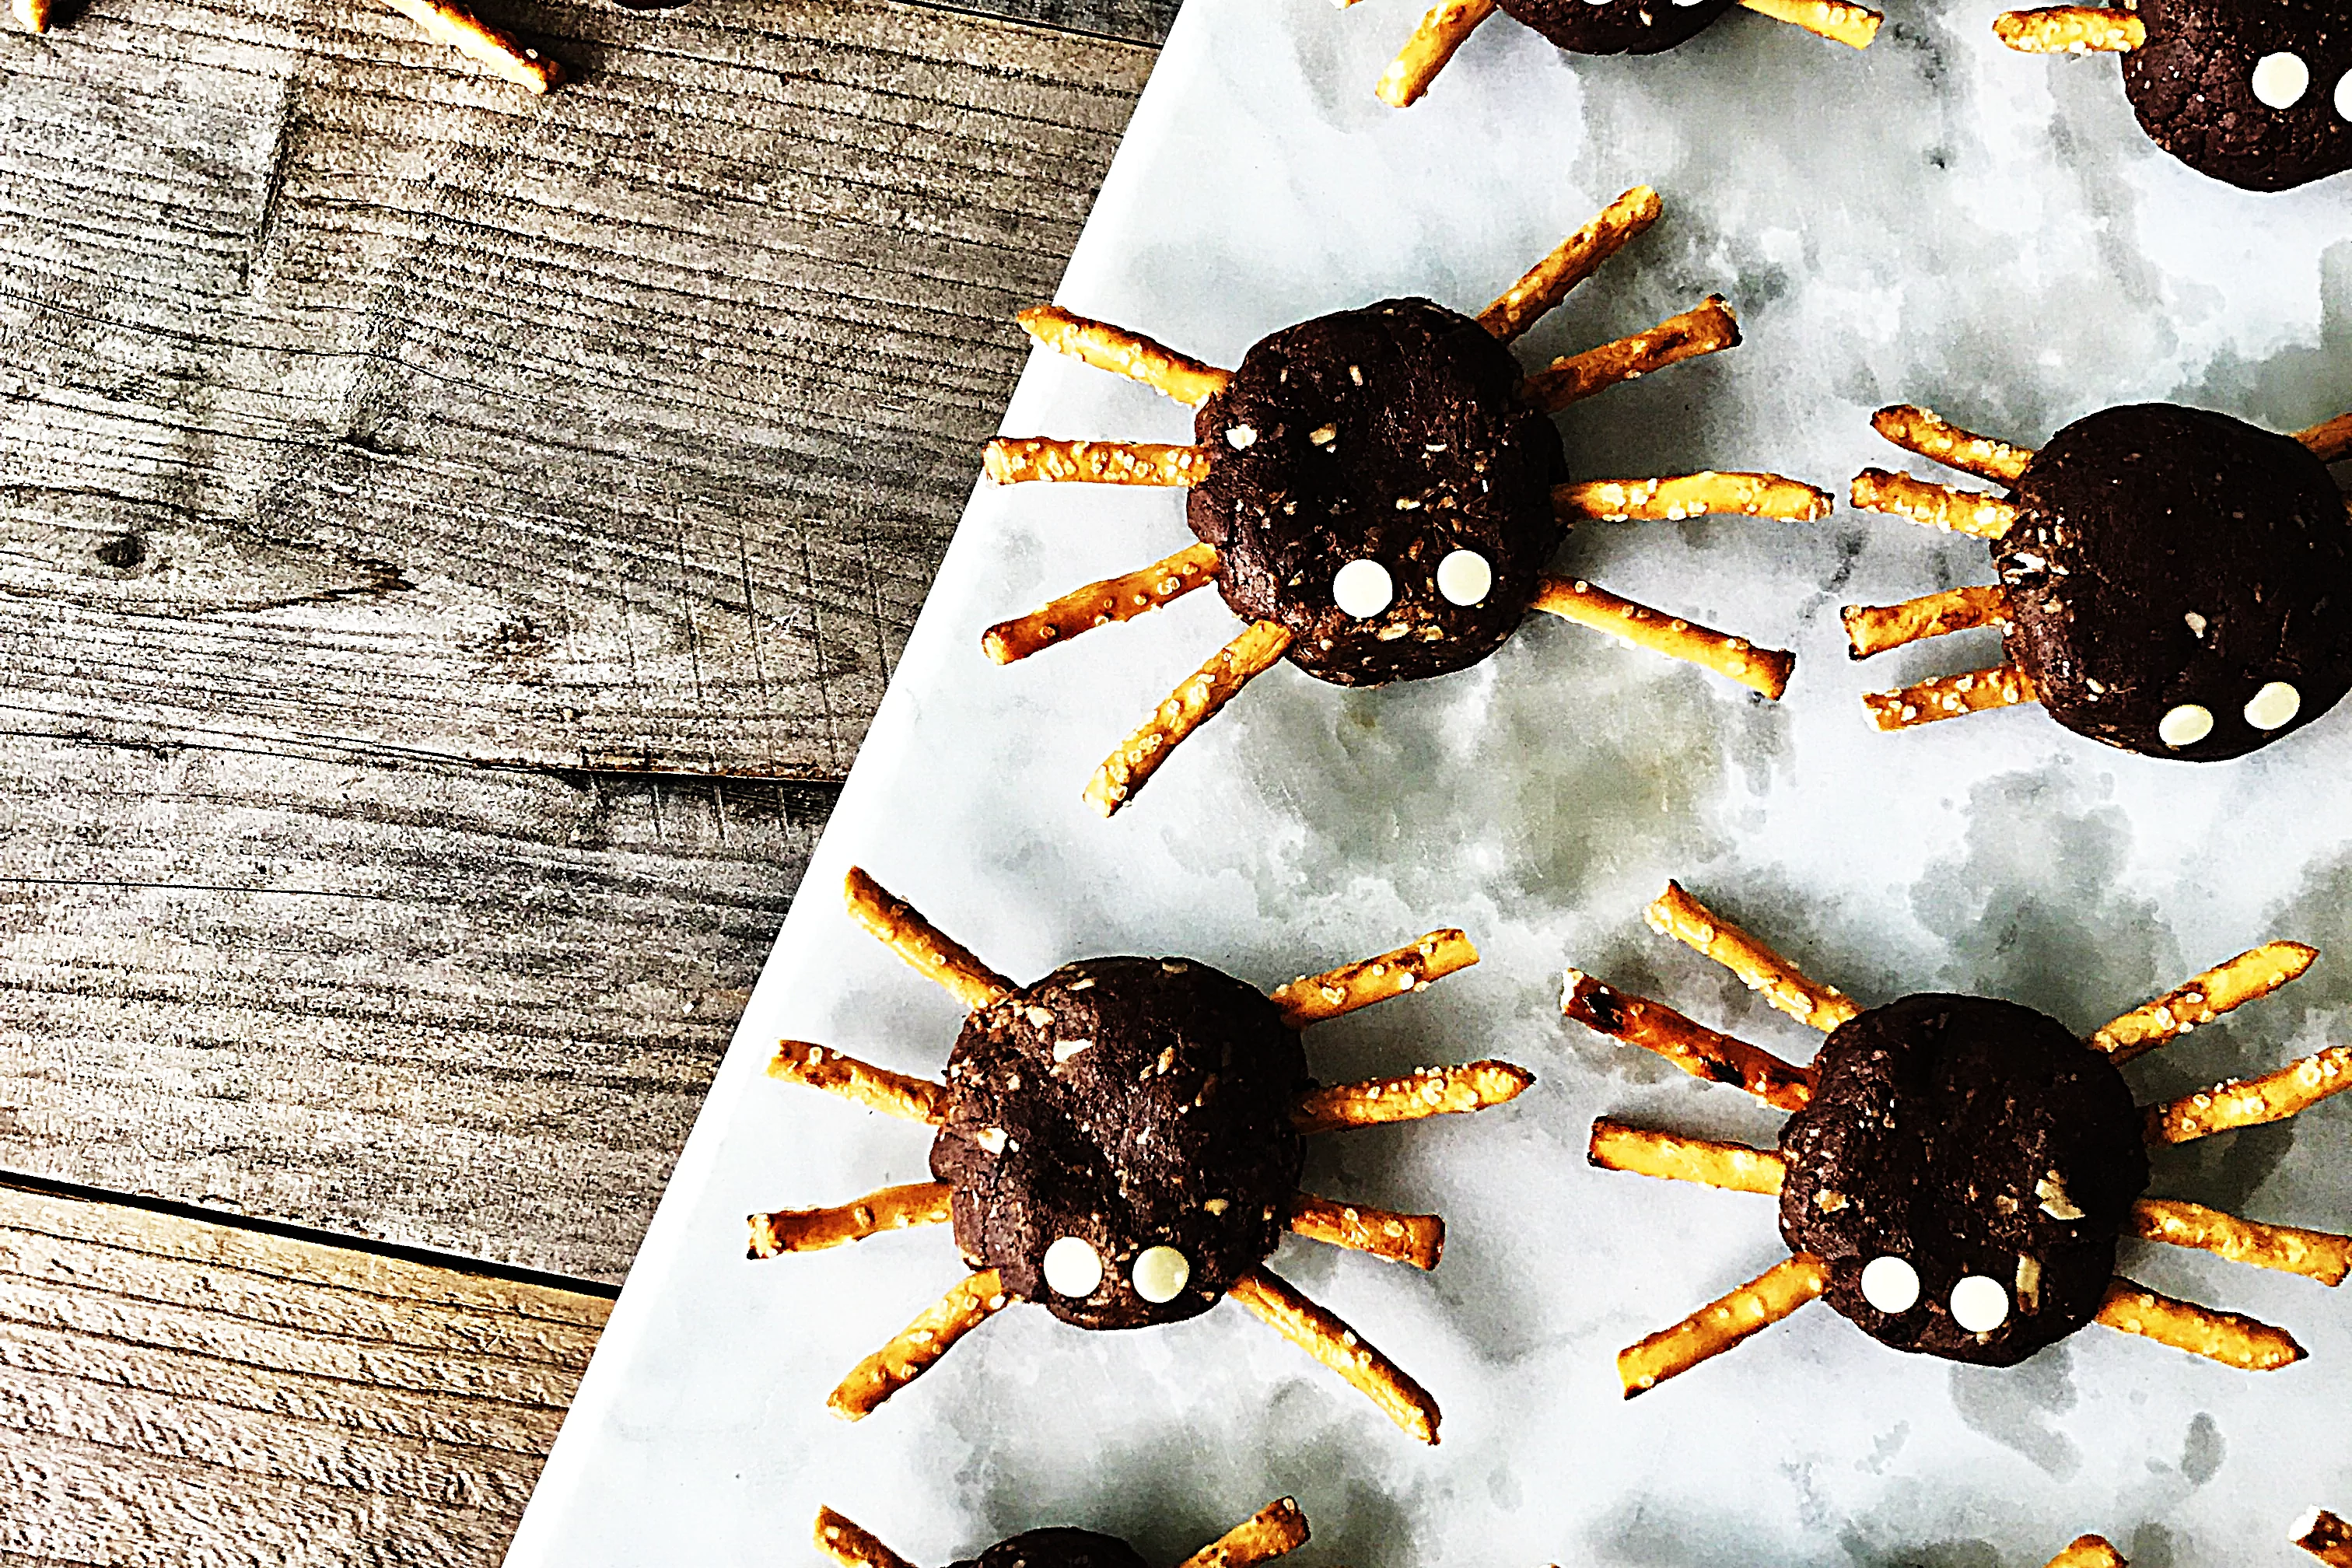 Stupid-Easy Recipe for Chocolate-Mint Halloween Spiders (#1 Top-Rated)